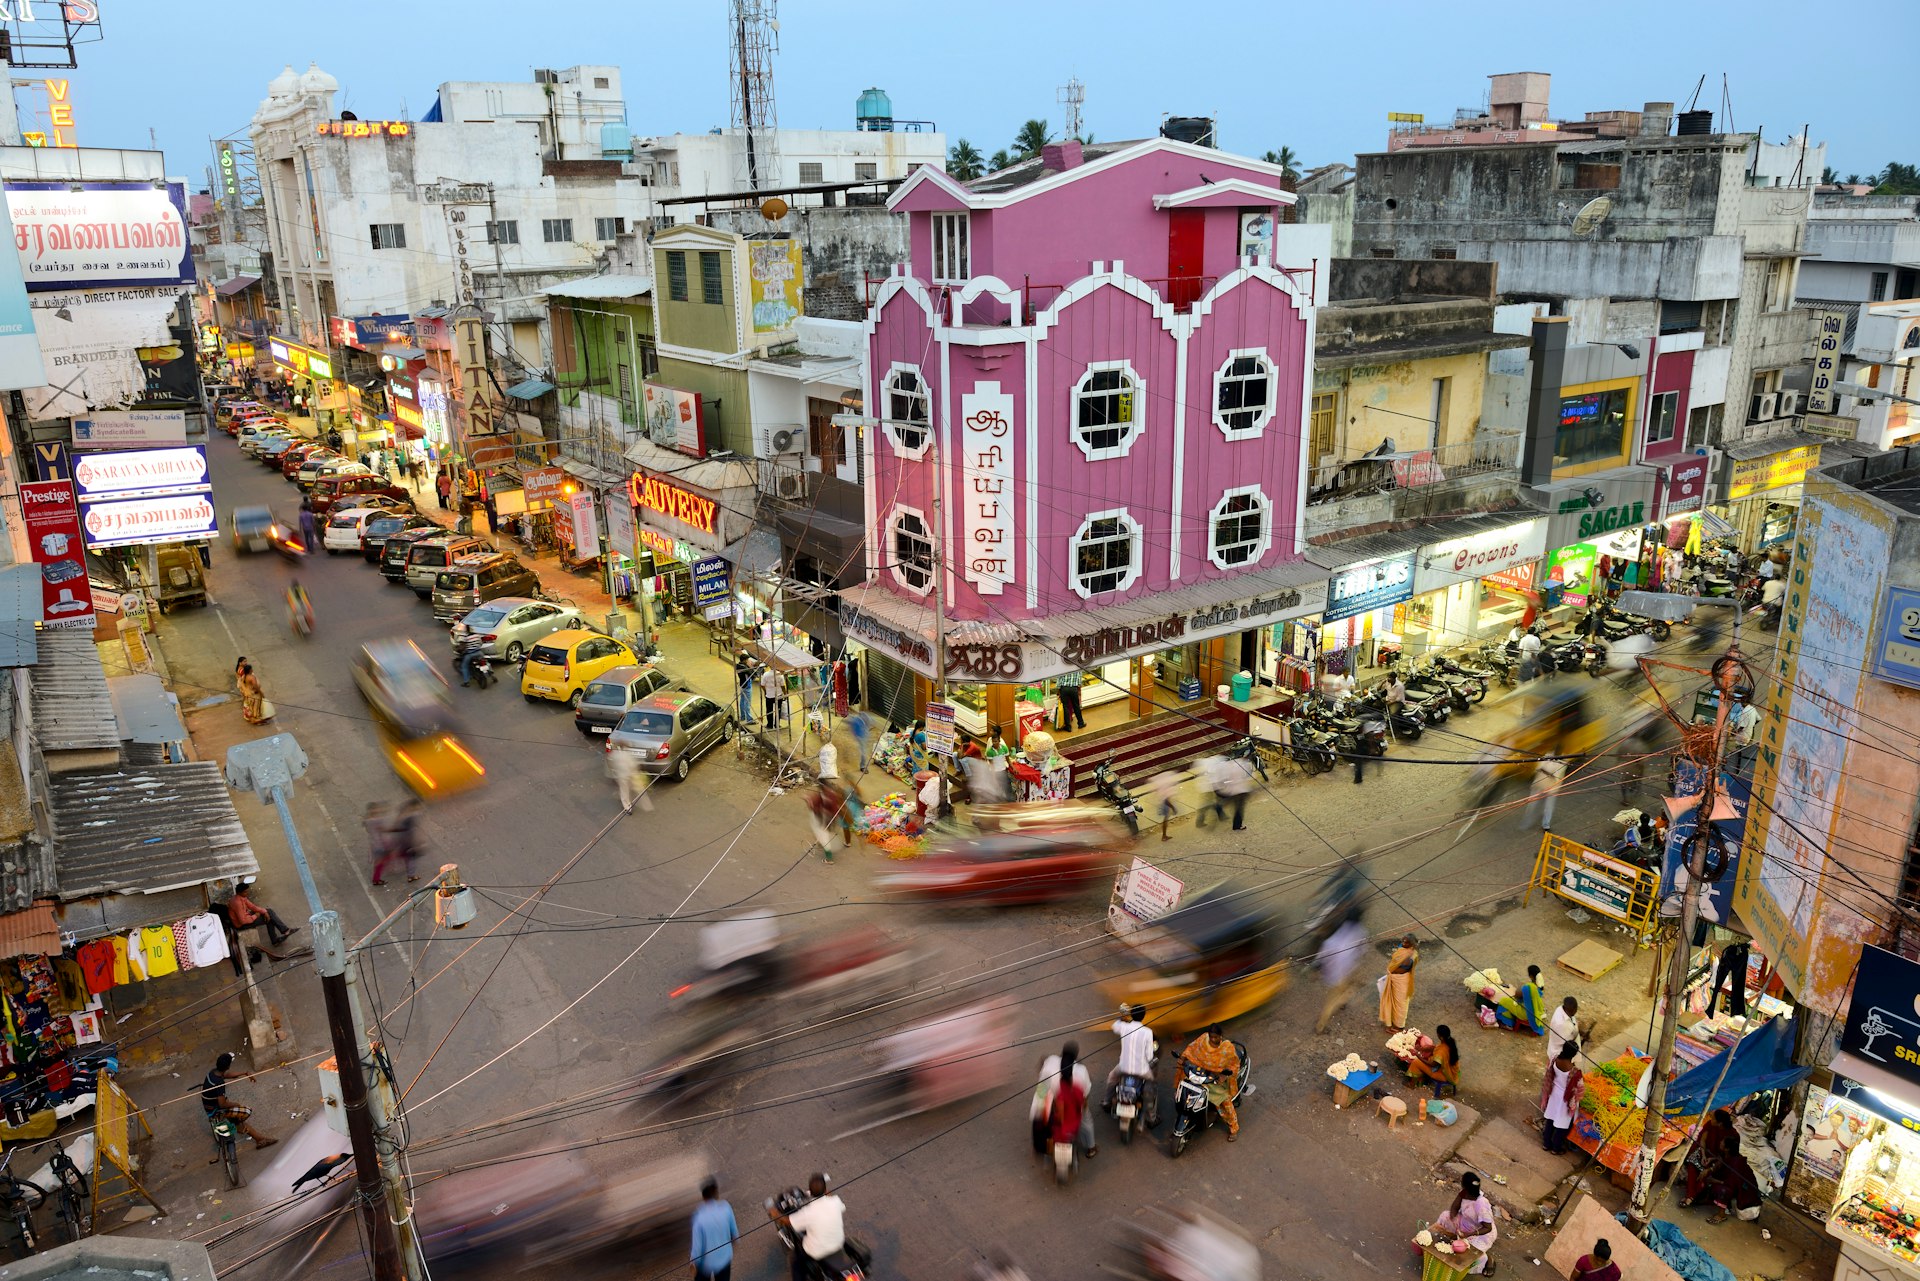 An aerial view of busy streets at dusk in the new town of Pondicherry, India